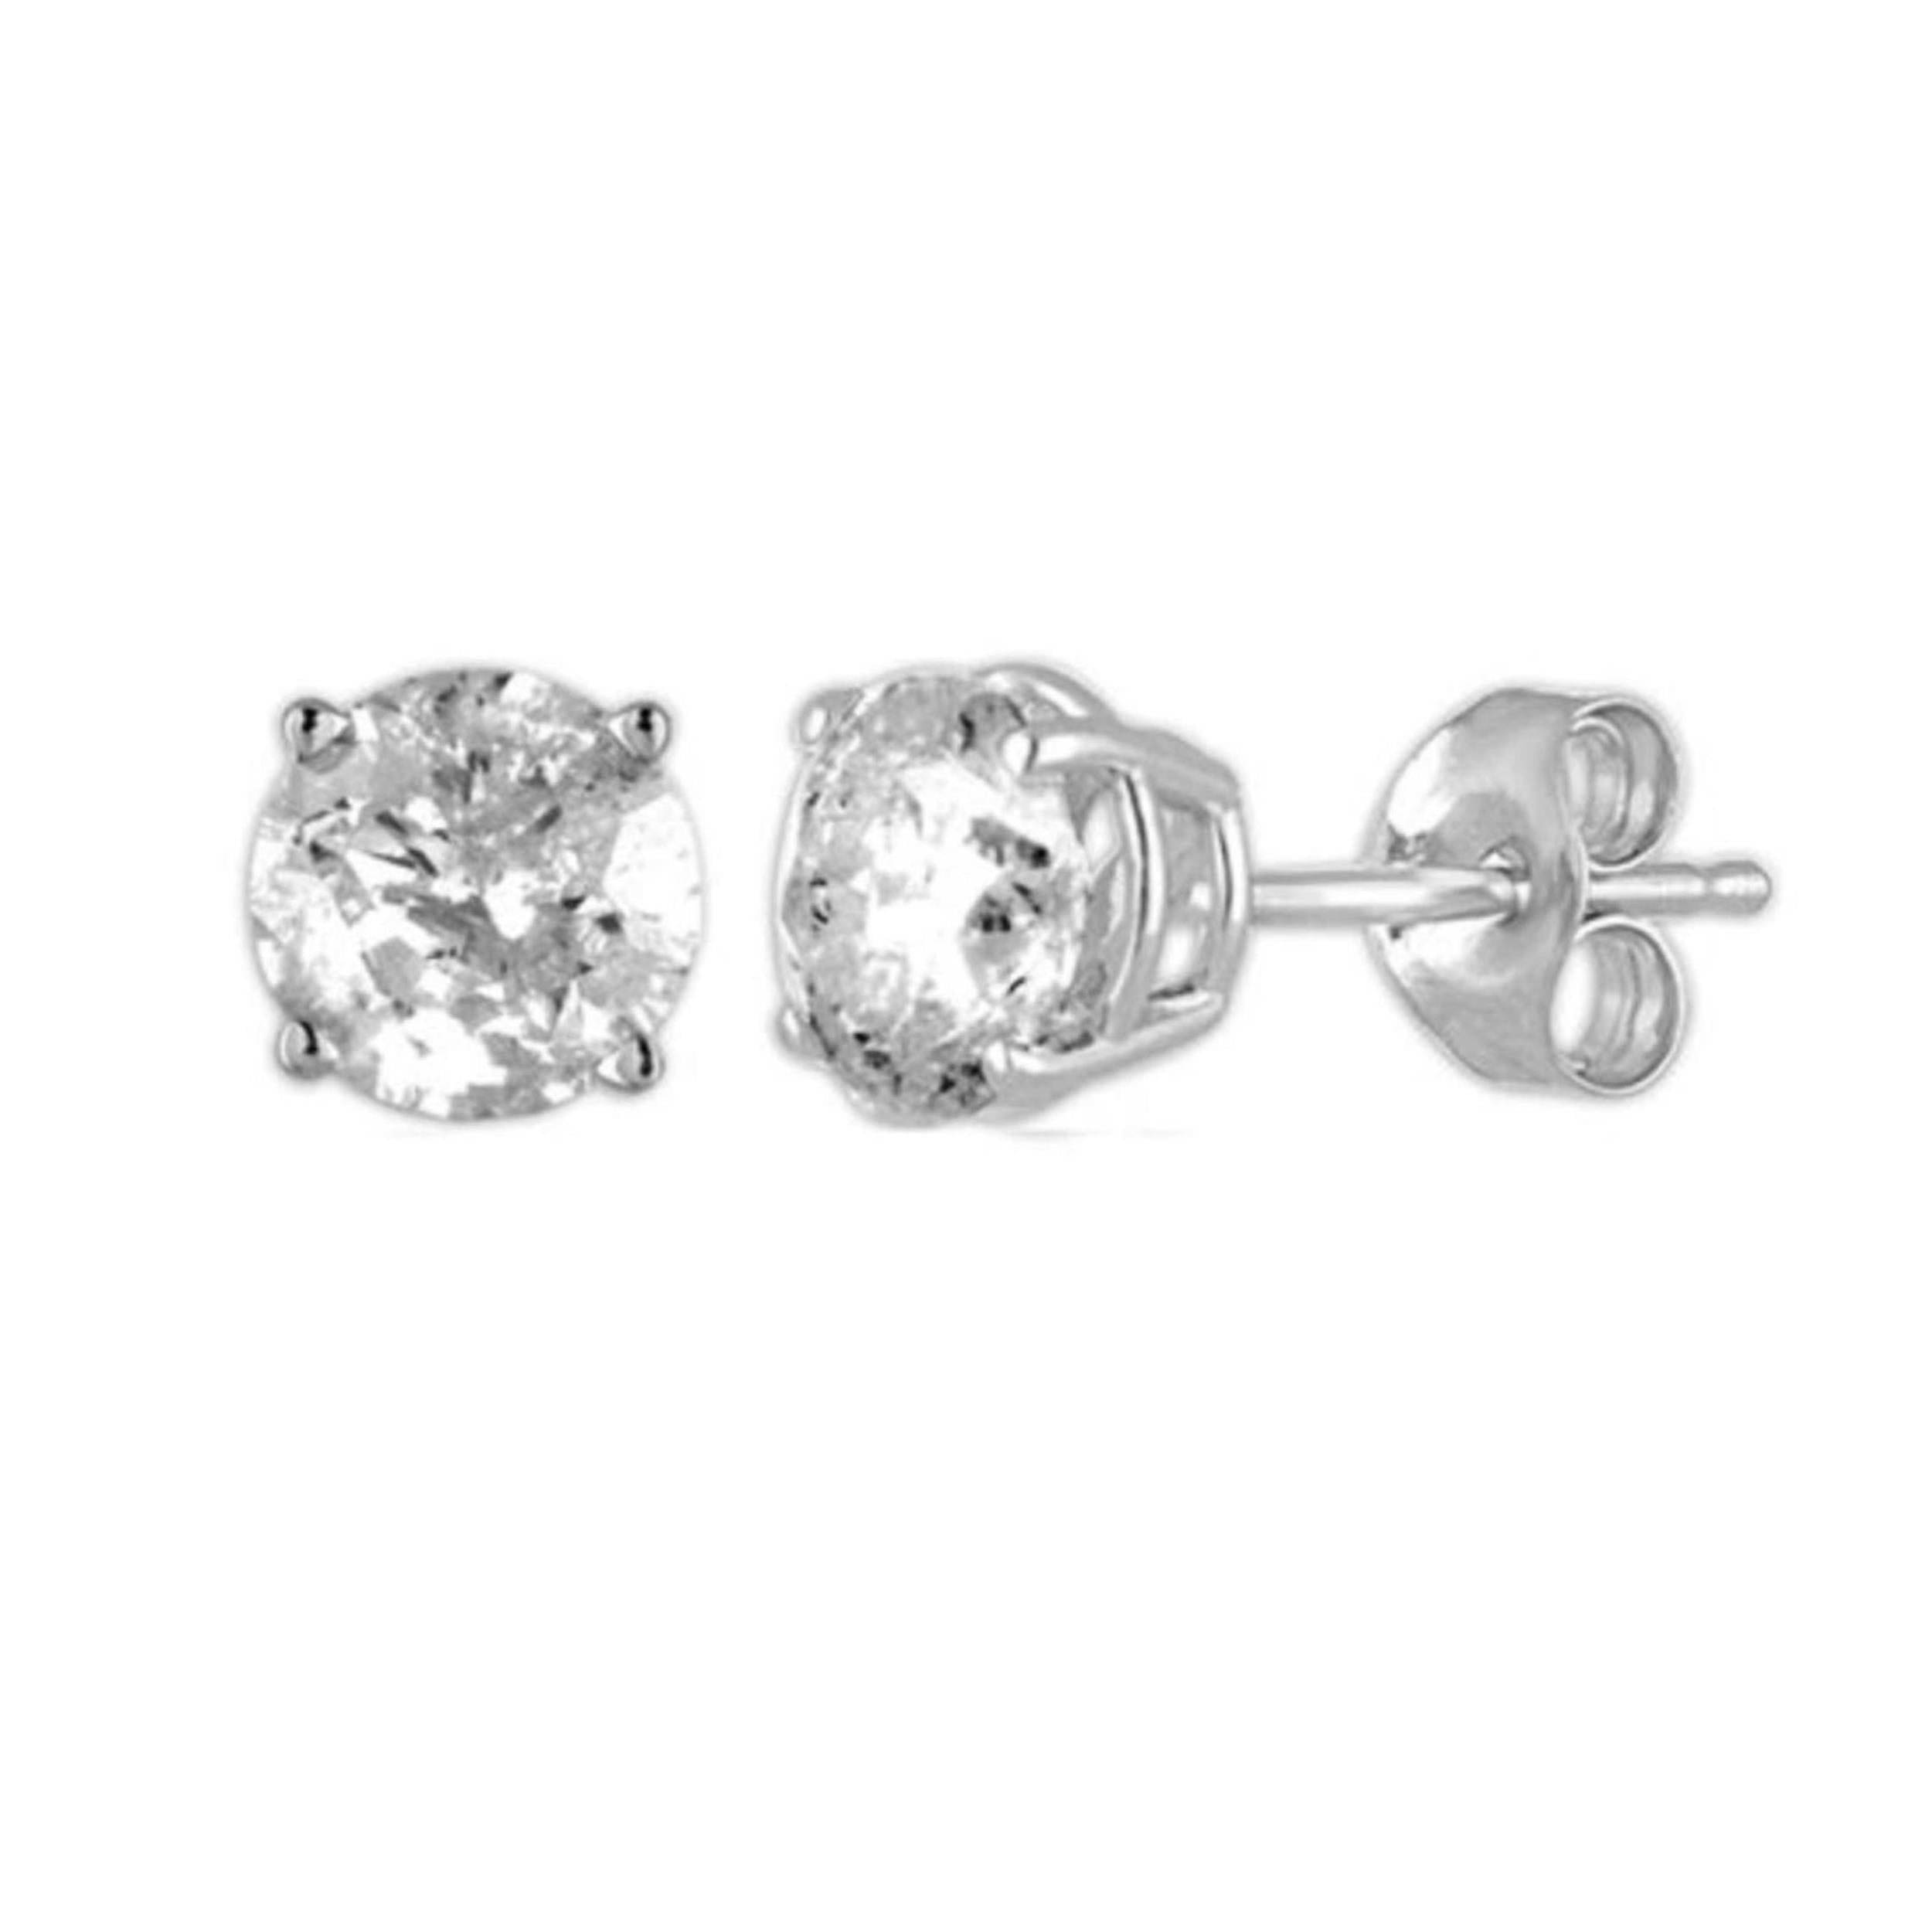 14Kt White Gold 1 Ct Genuine Natural Diamond Round Stud Earrings